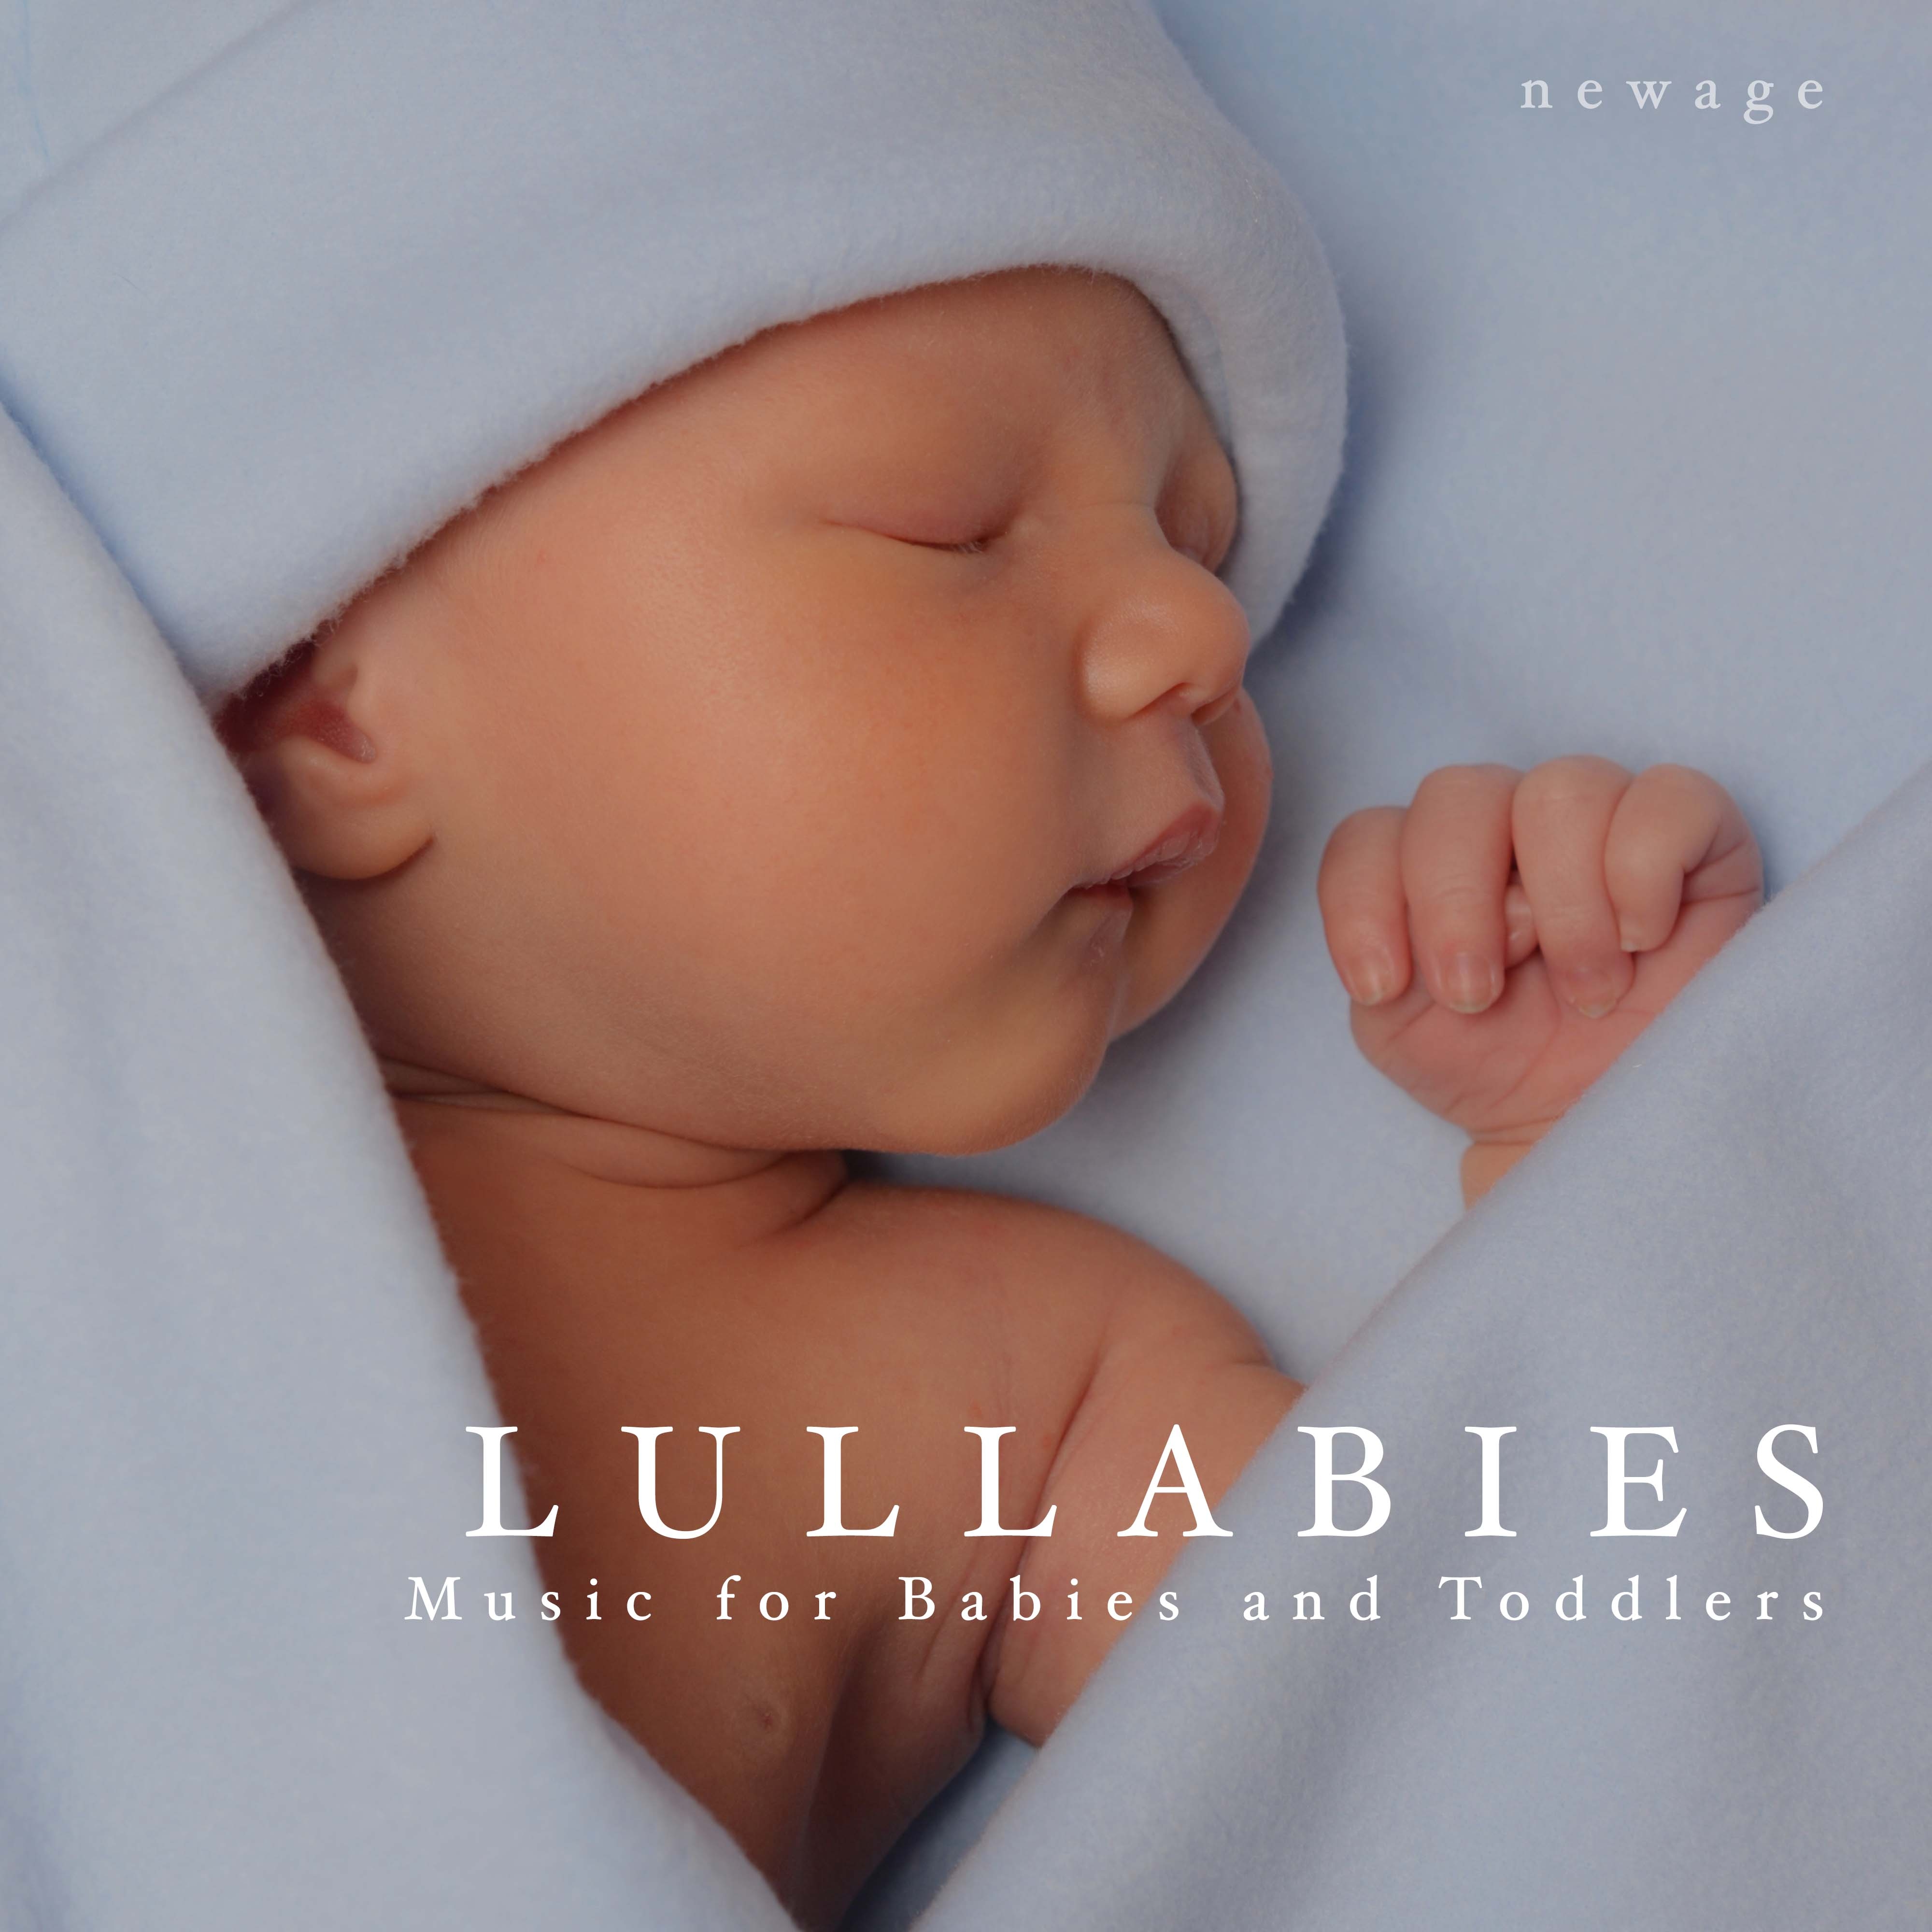 Lullabies - Music for Babies and Toddlers